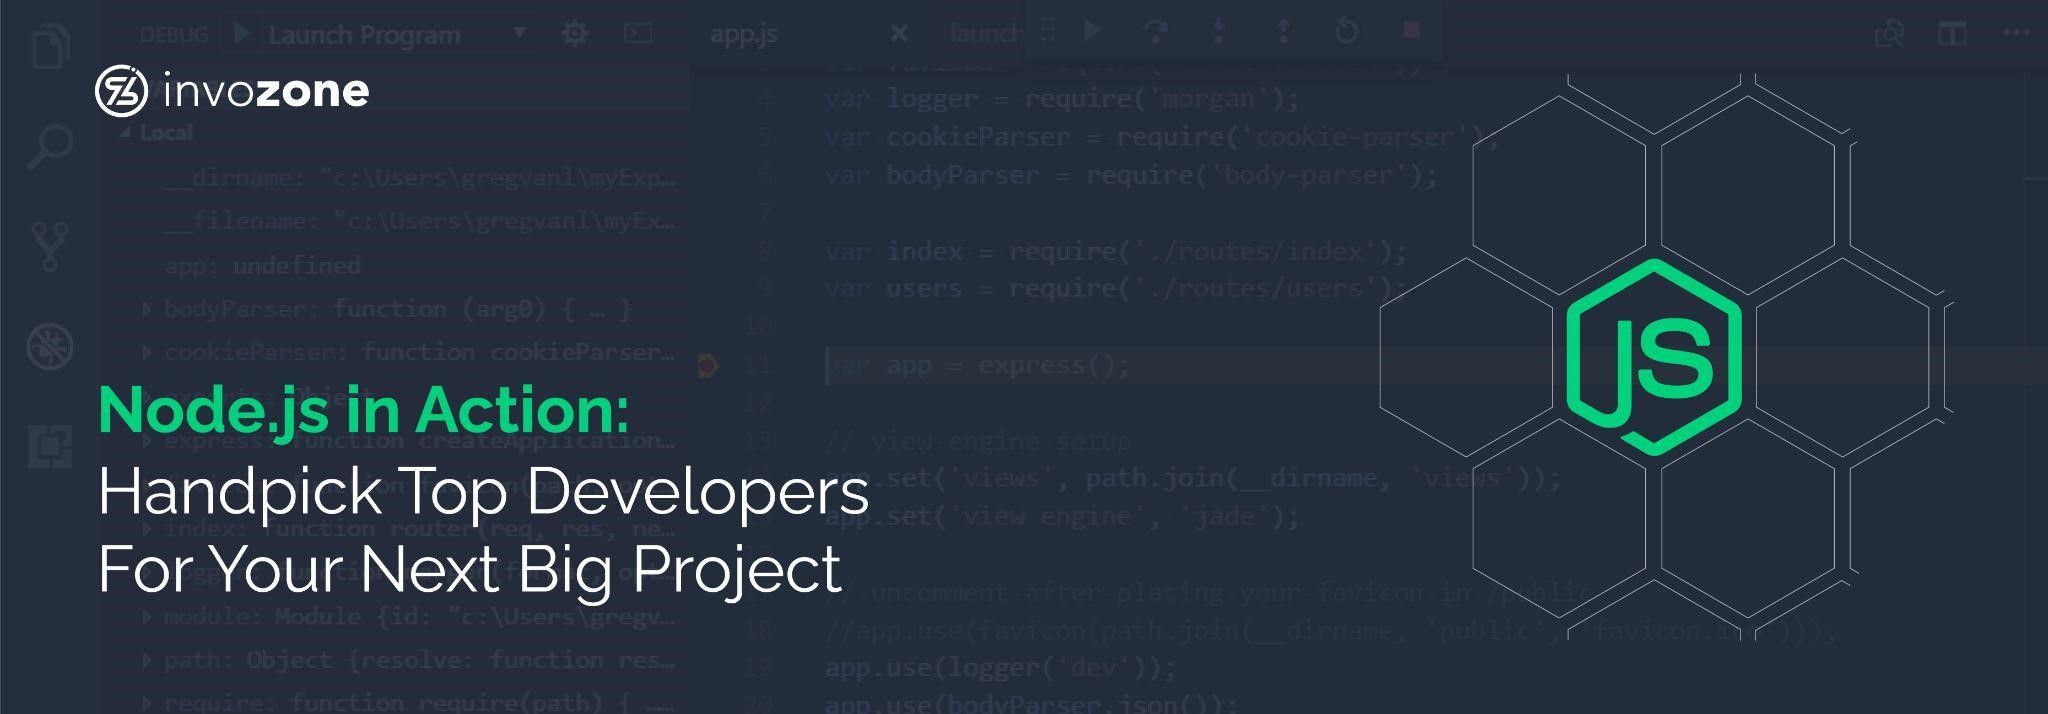 node.js top developers for projects featured image